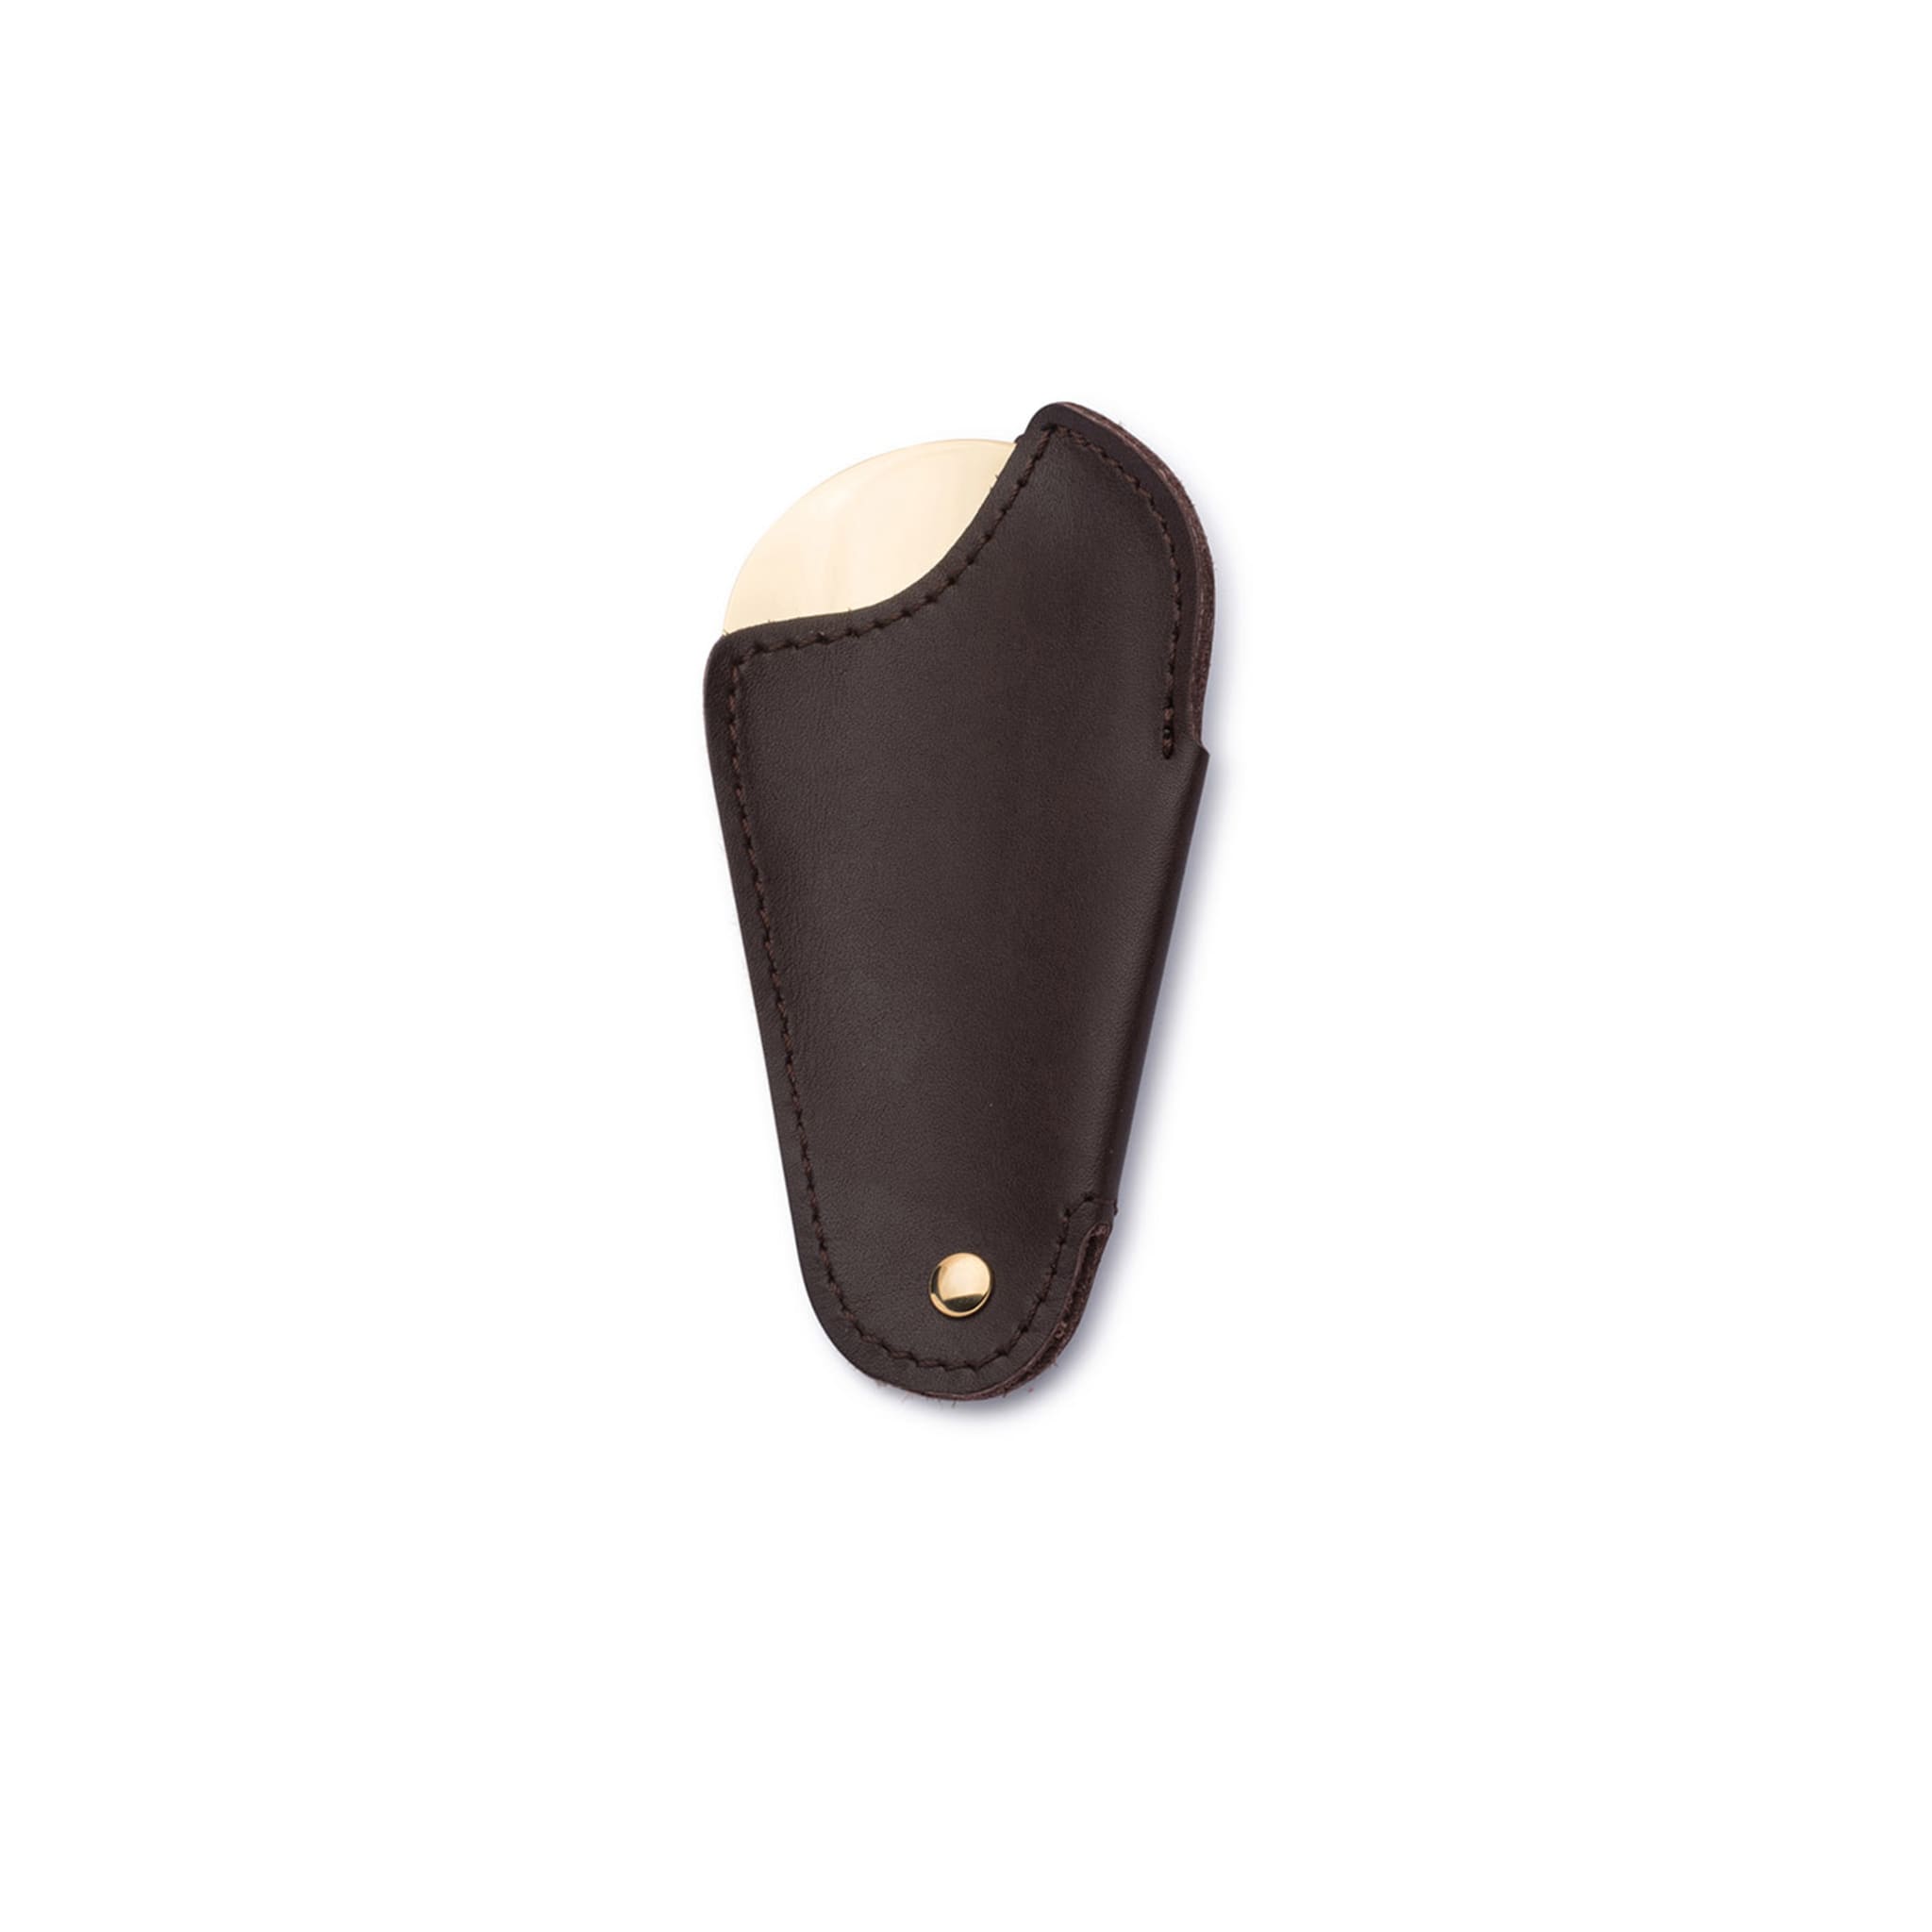 Brown & Gold Leather Travel Shoe Horn - Alternative view 2